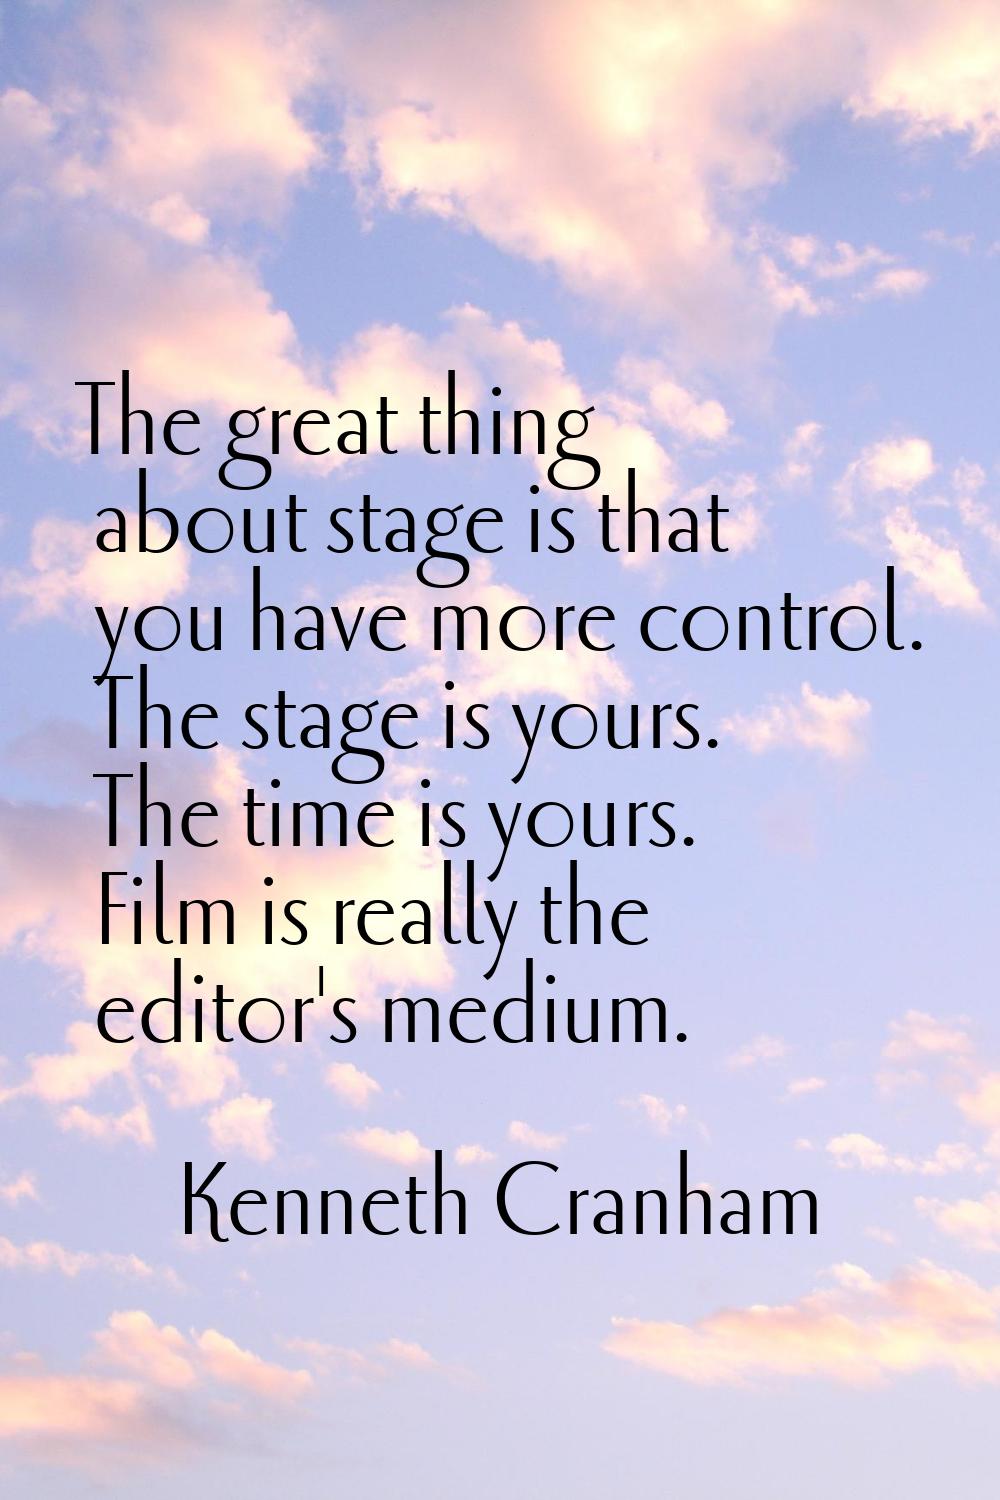 The great thing about stage is that you have more control. The stage is yours. The time is yours. F